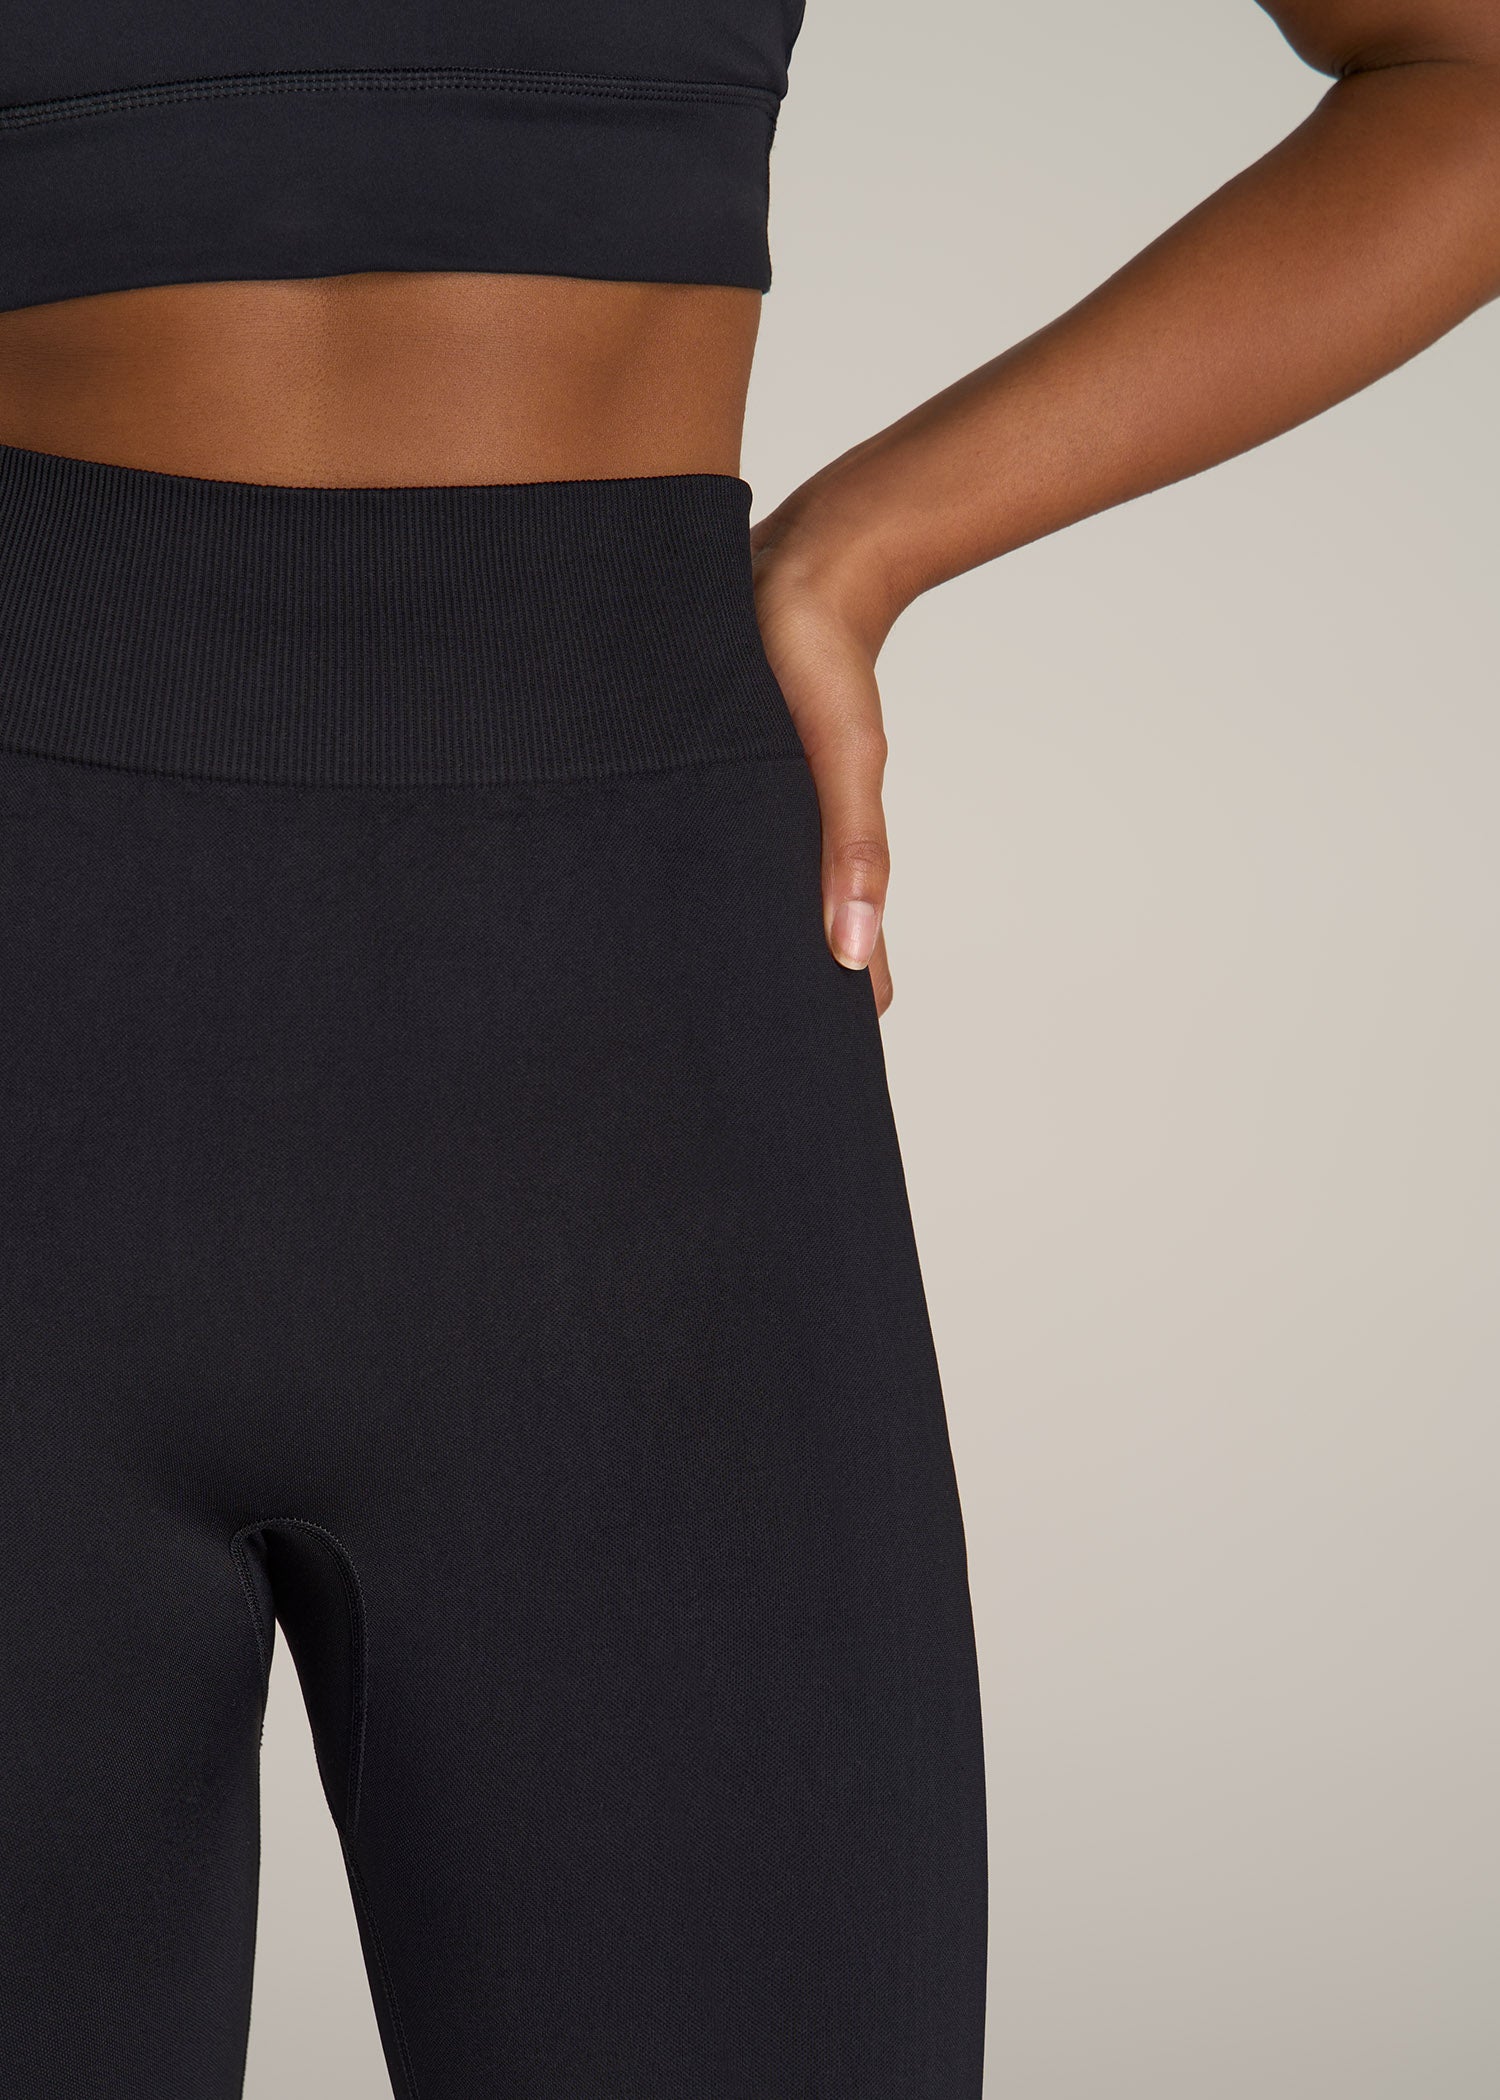 American-Tall-Women-Seamless-Compression-Legging-Solid-Black-detail